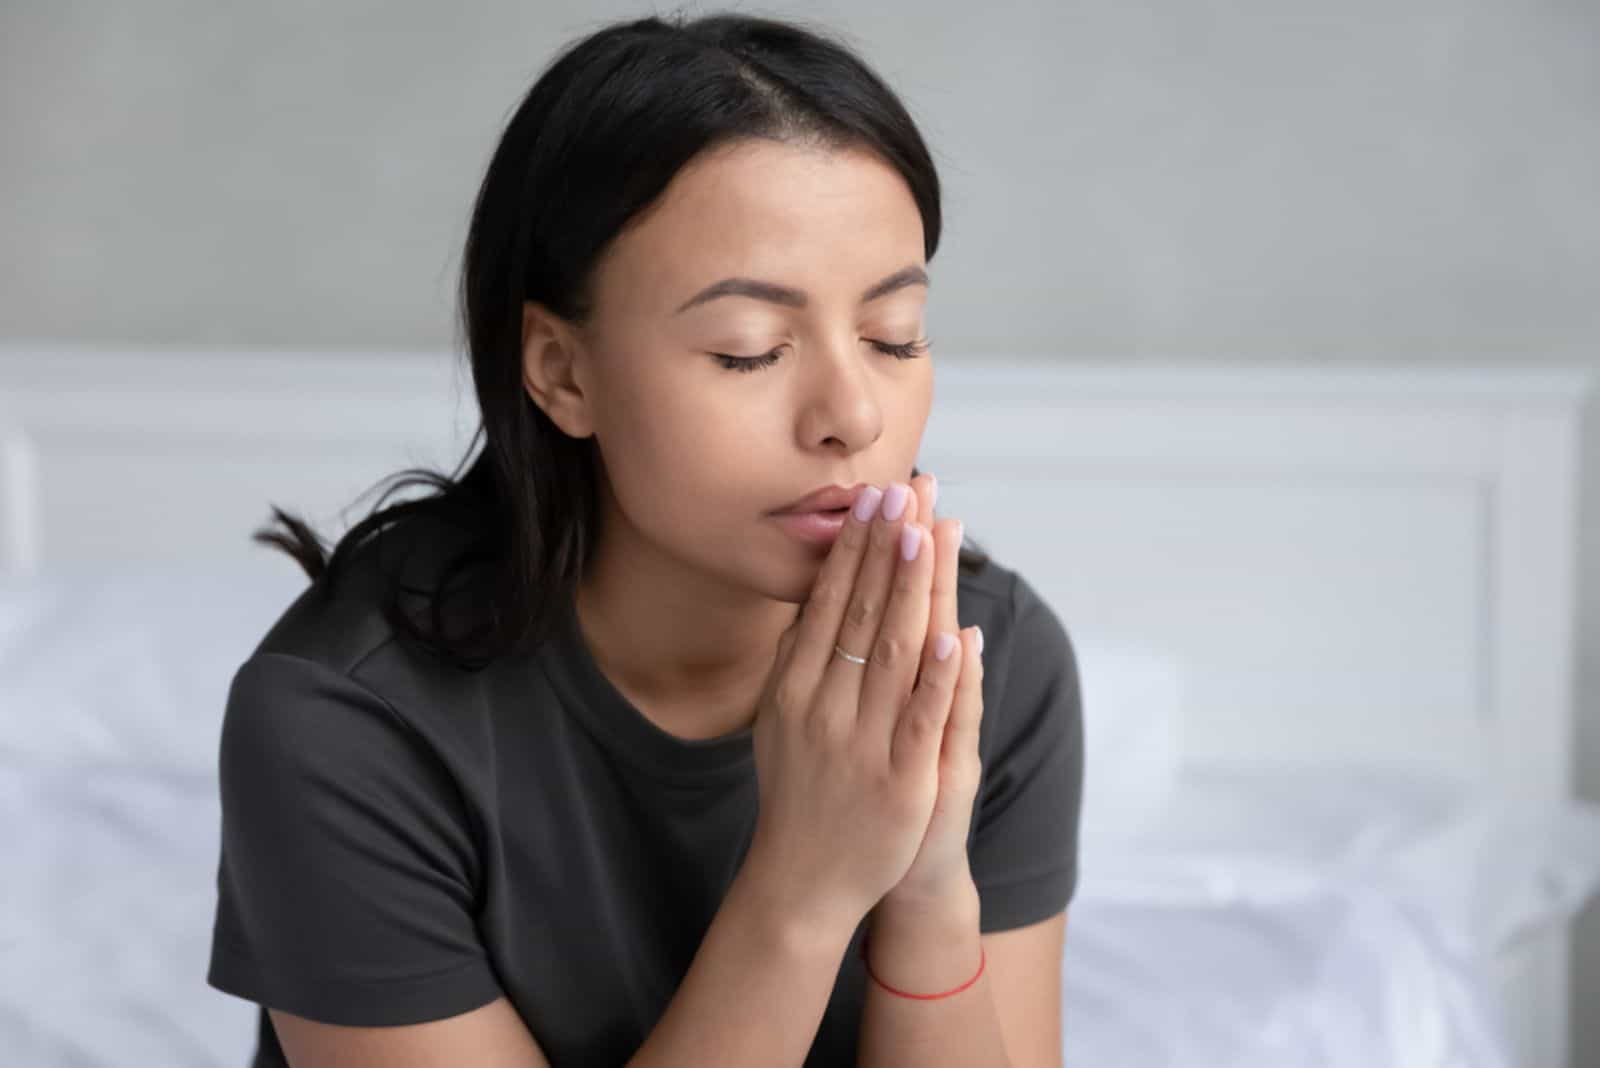 young woman praying with closed eyes in bedroom